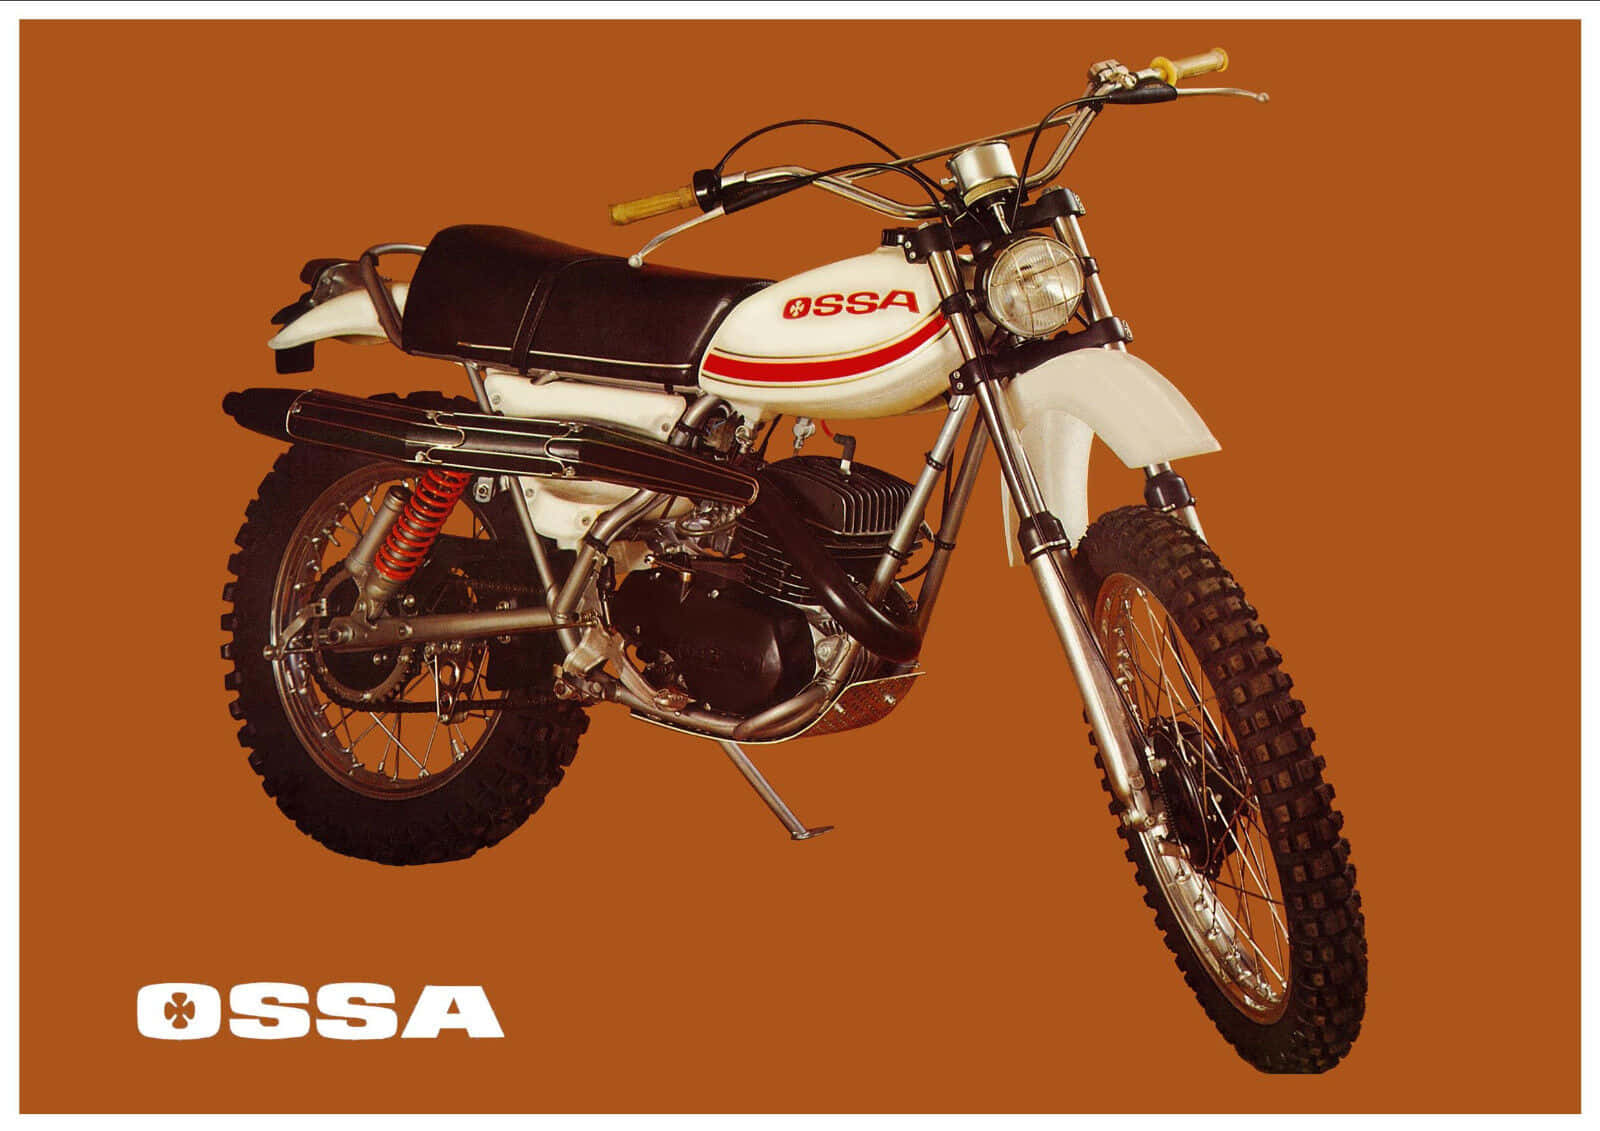 Classic Ossa Motorcycle In Vintage Garage Wallpaper